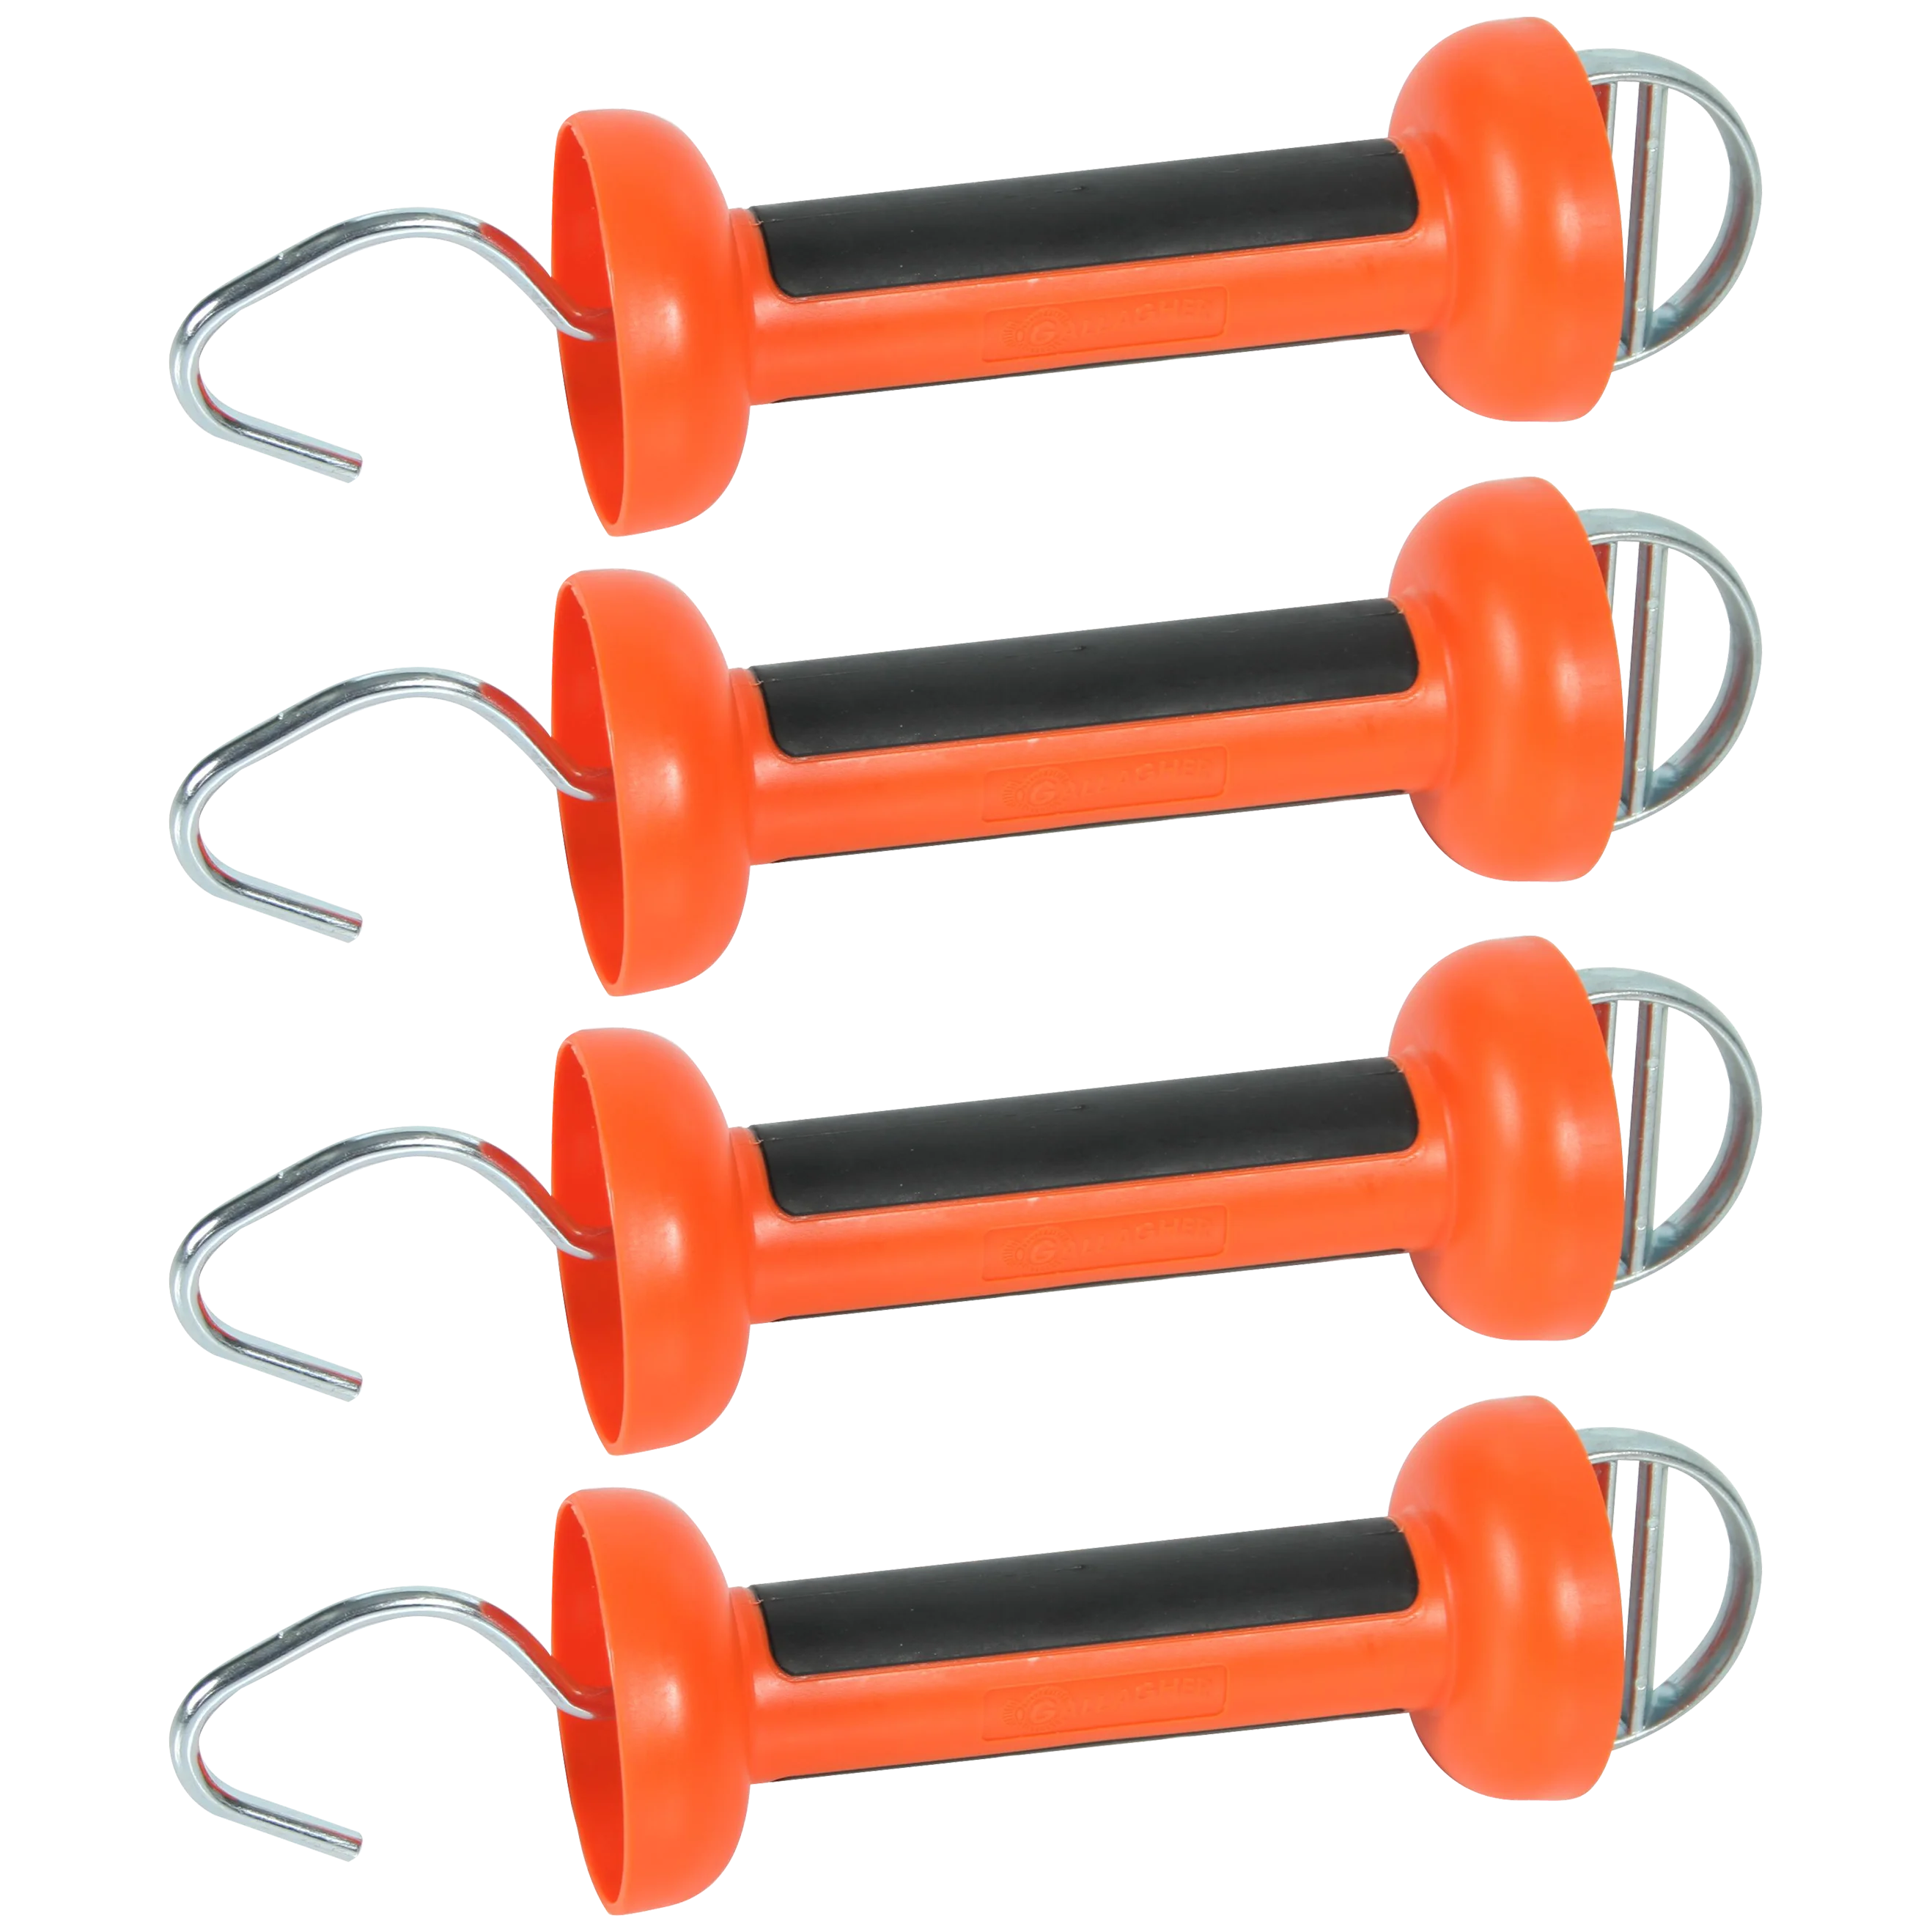 Soft Touch Gate Handle Regular, orange - tape (pack of 4)